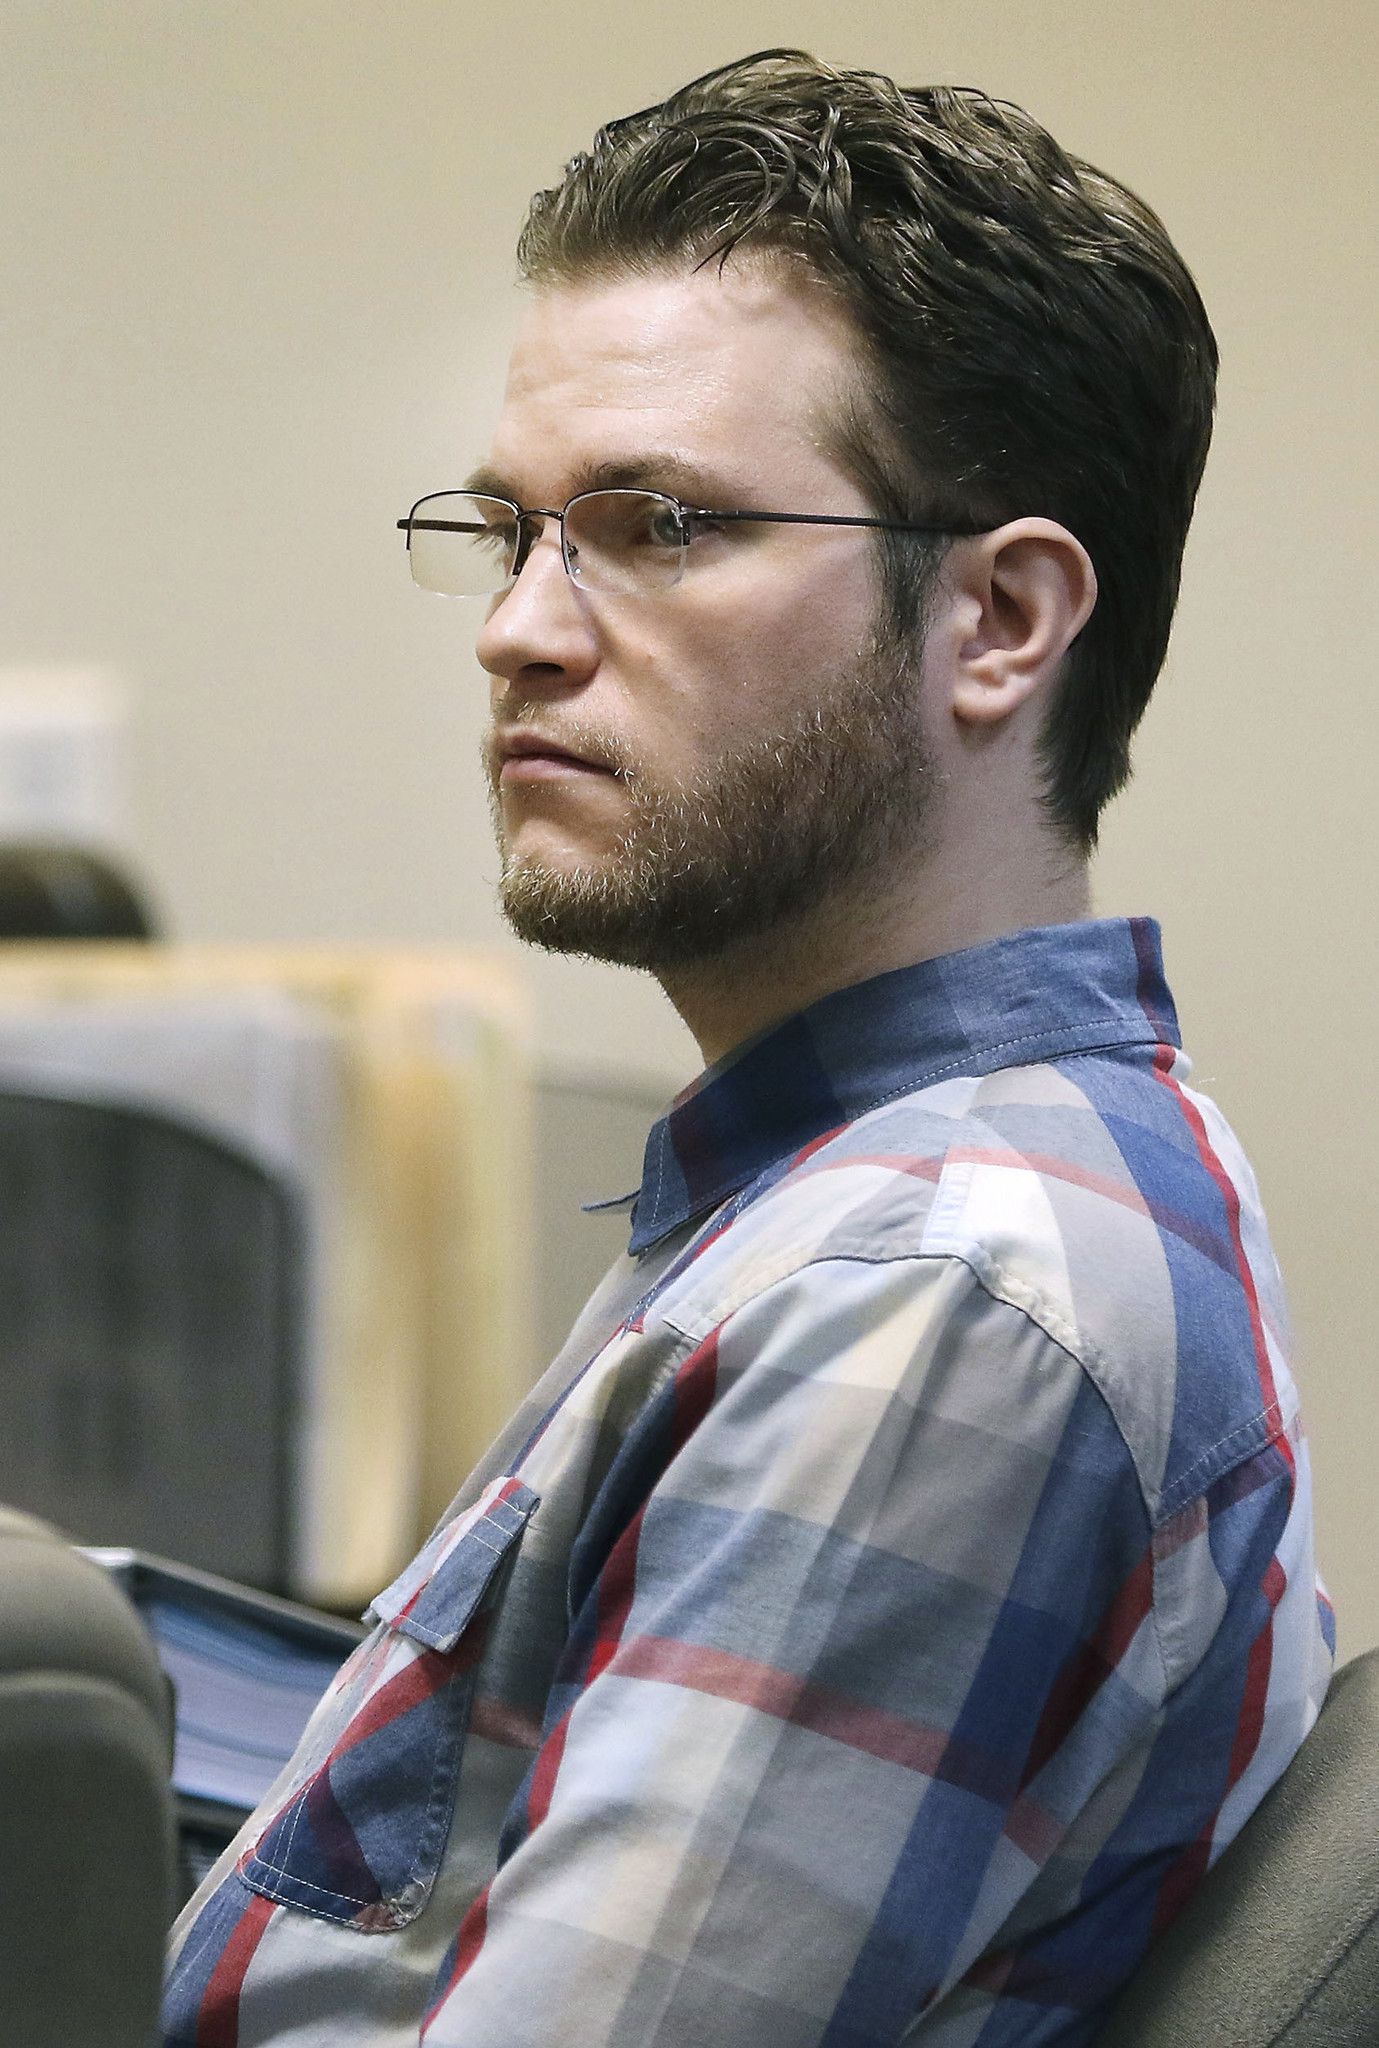 Jury finds Eau Claire man not guilty of homicide in Dunn County